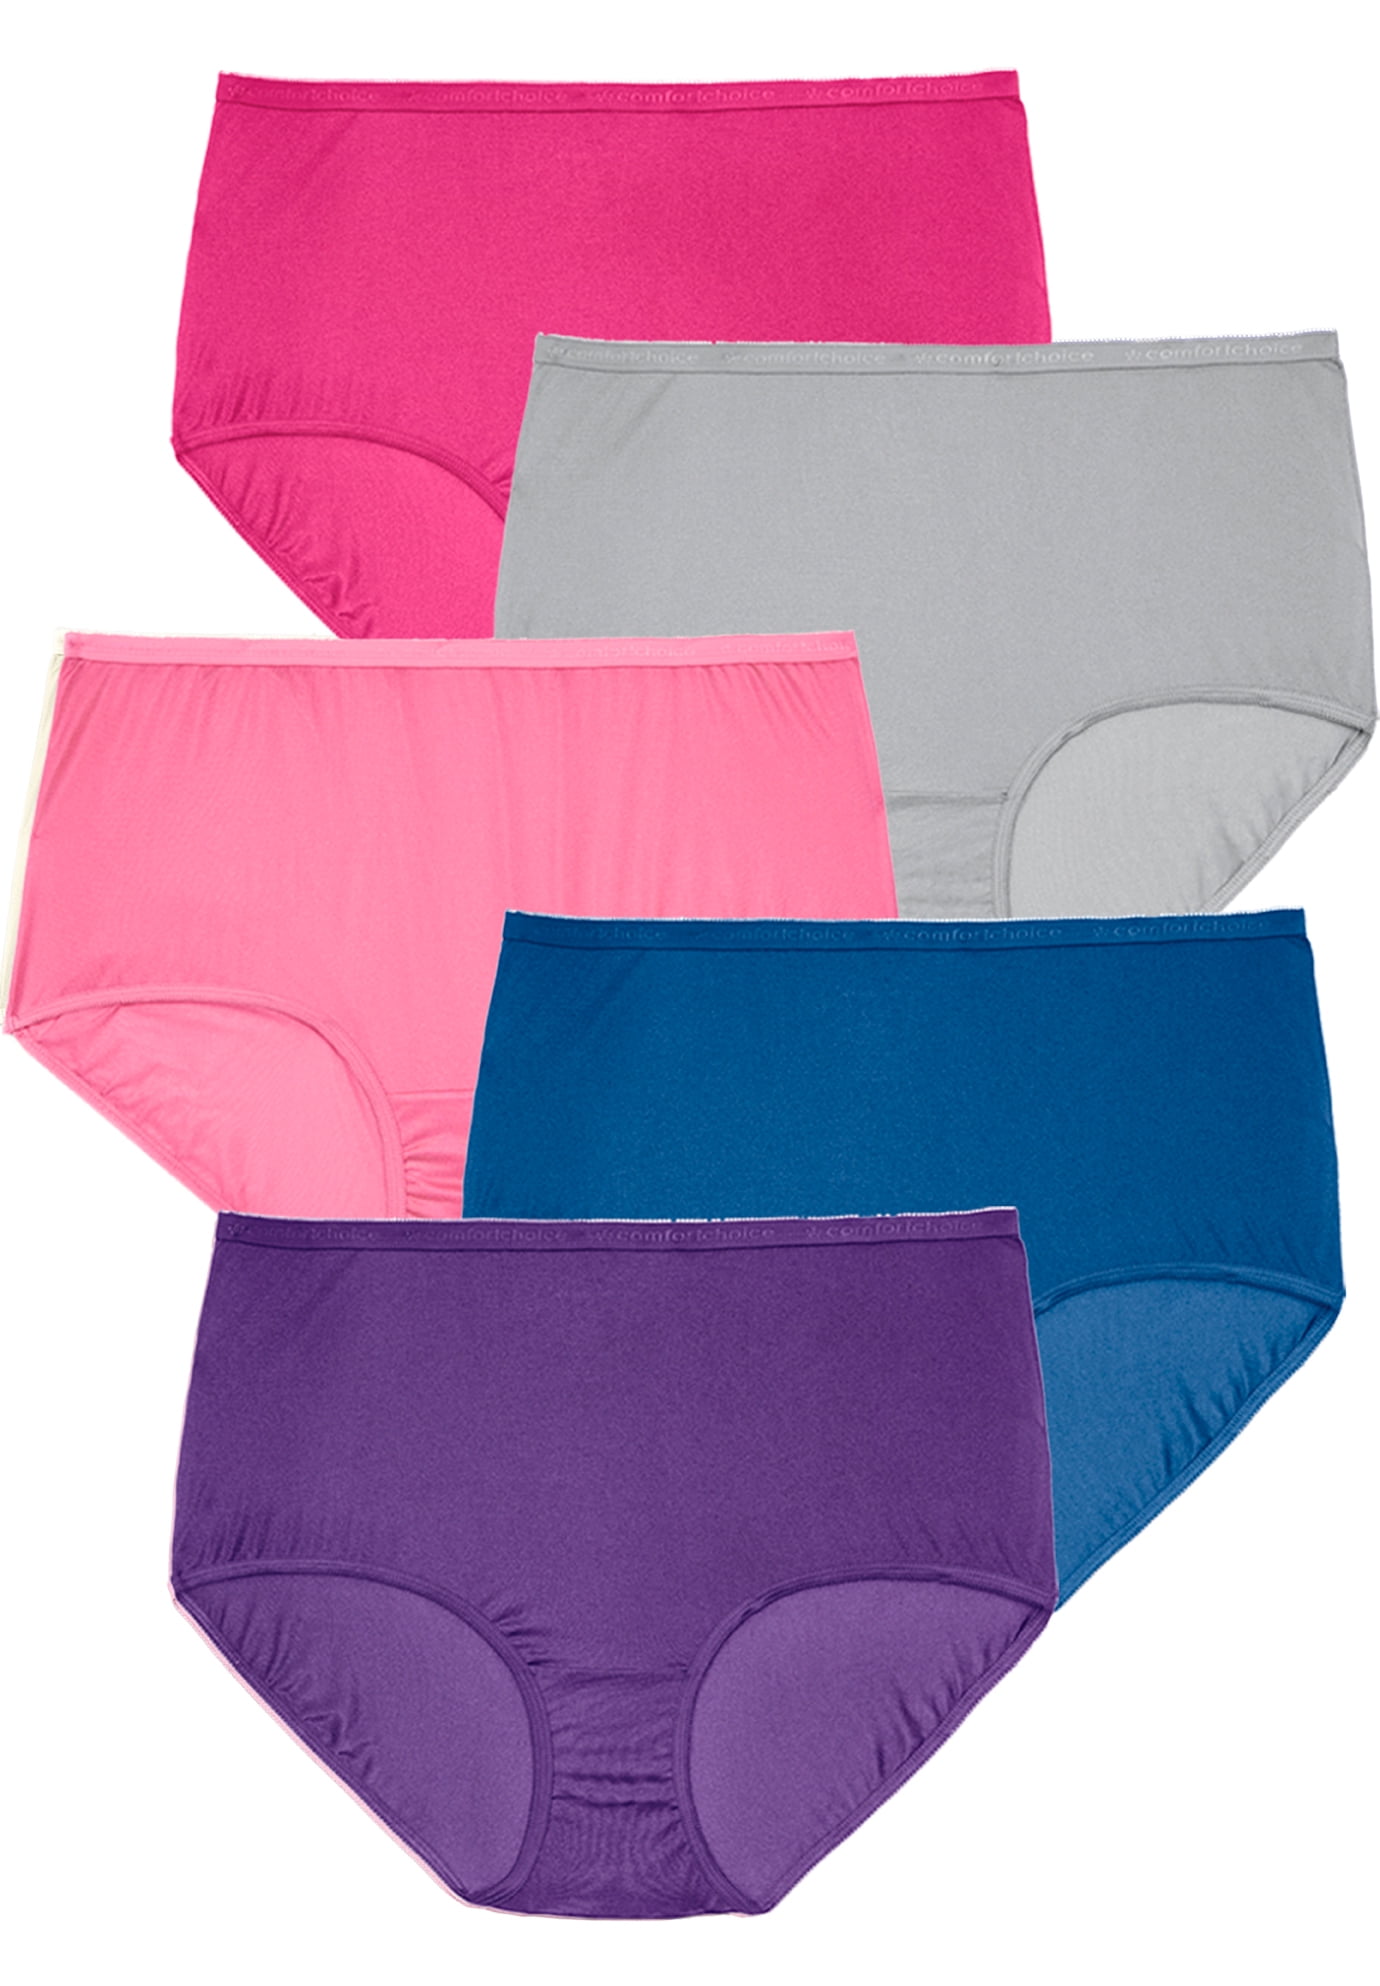 Comfort Choice Womens Plus Size 5-Pack Pure Cotton Full-Cut Brief